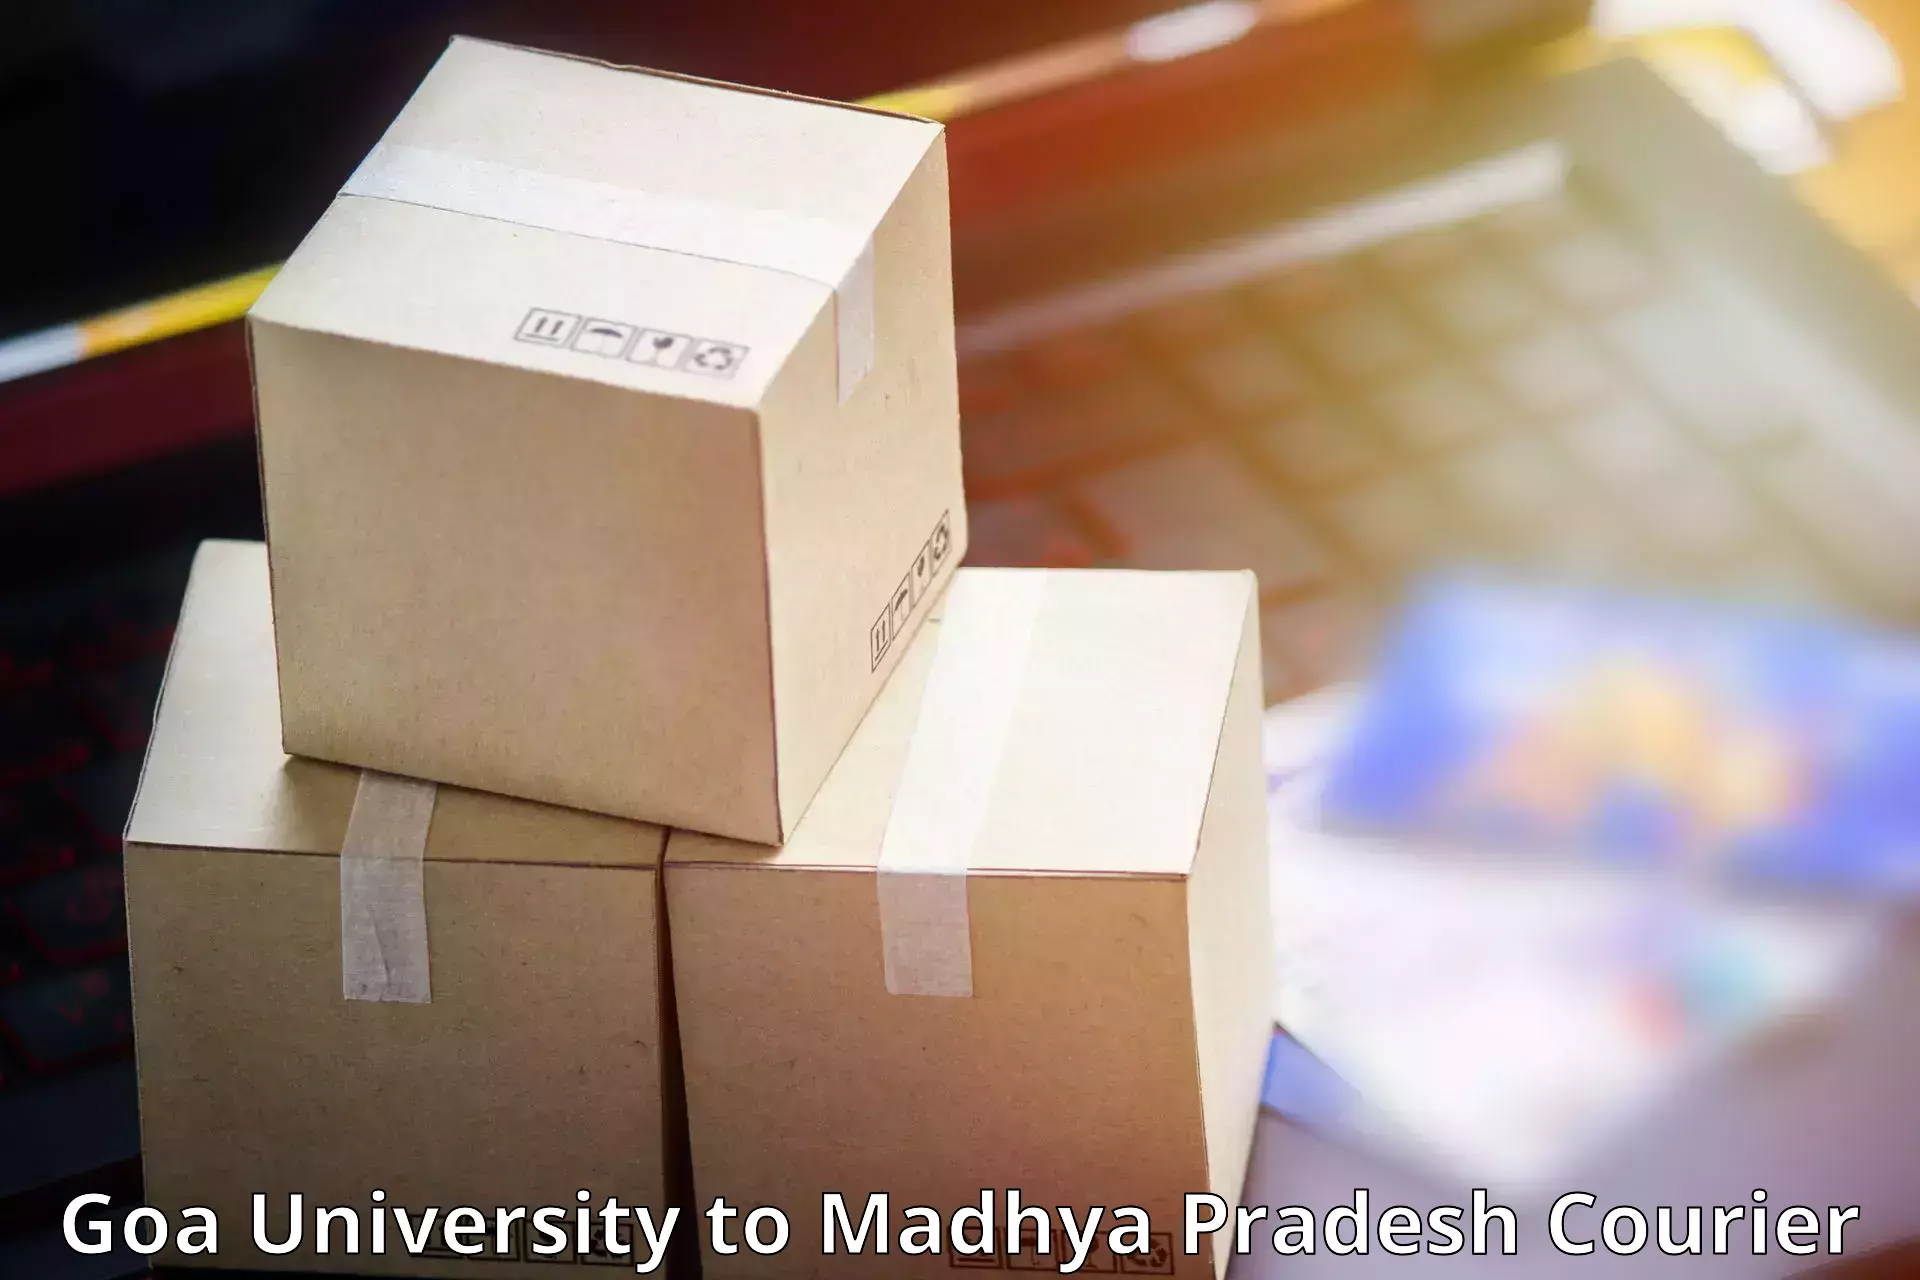 Express delivery solutions in Goa University to Madhya Pradesh